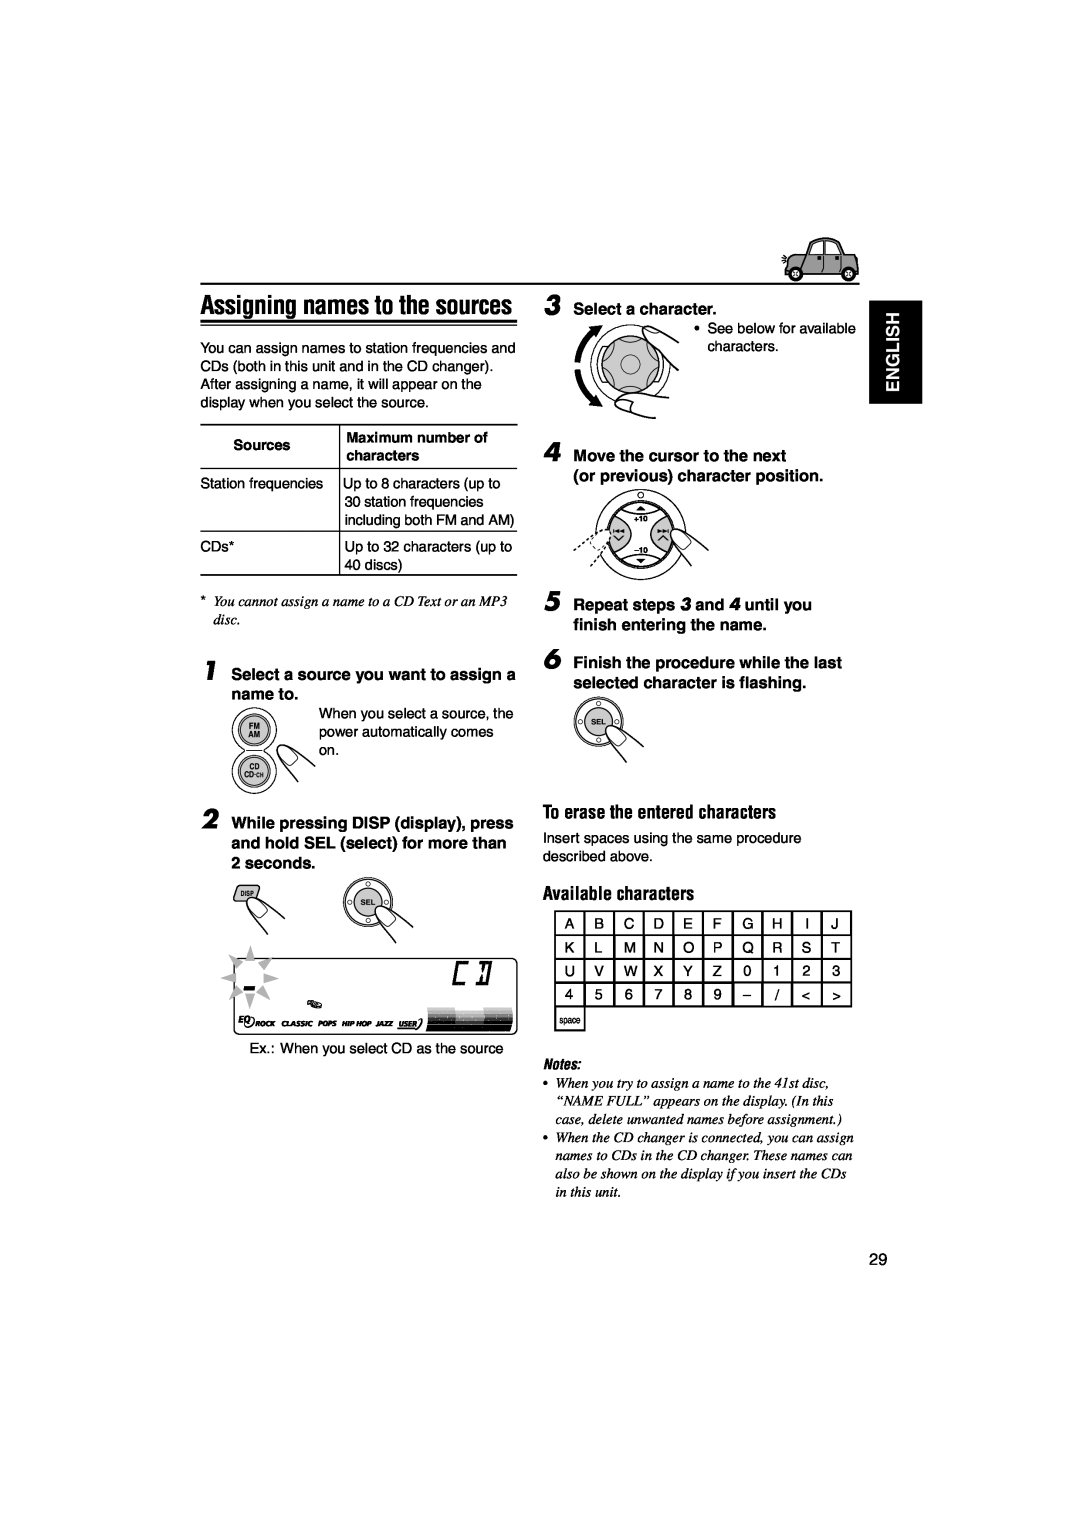 JVC KD-SX990 manual Assigning names to the sources, To erase the entered characters, Available characters, English, Sources 